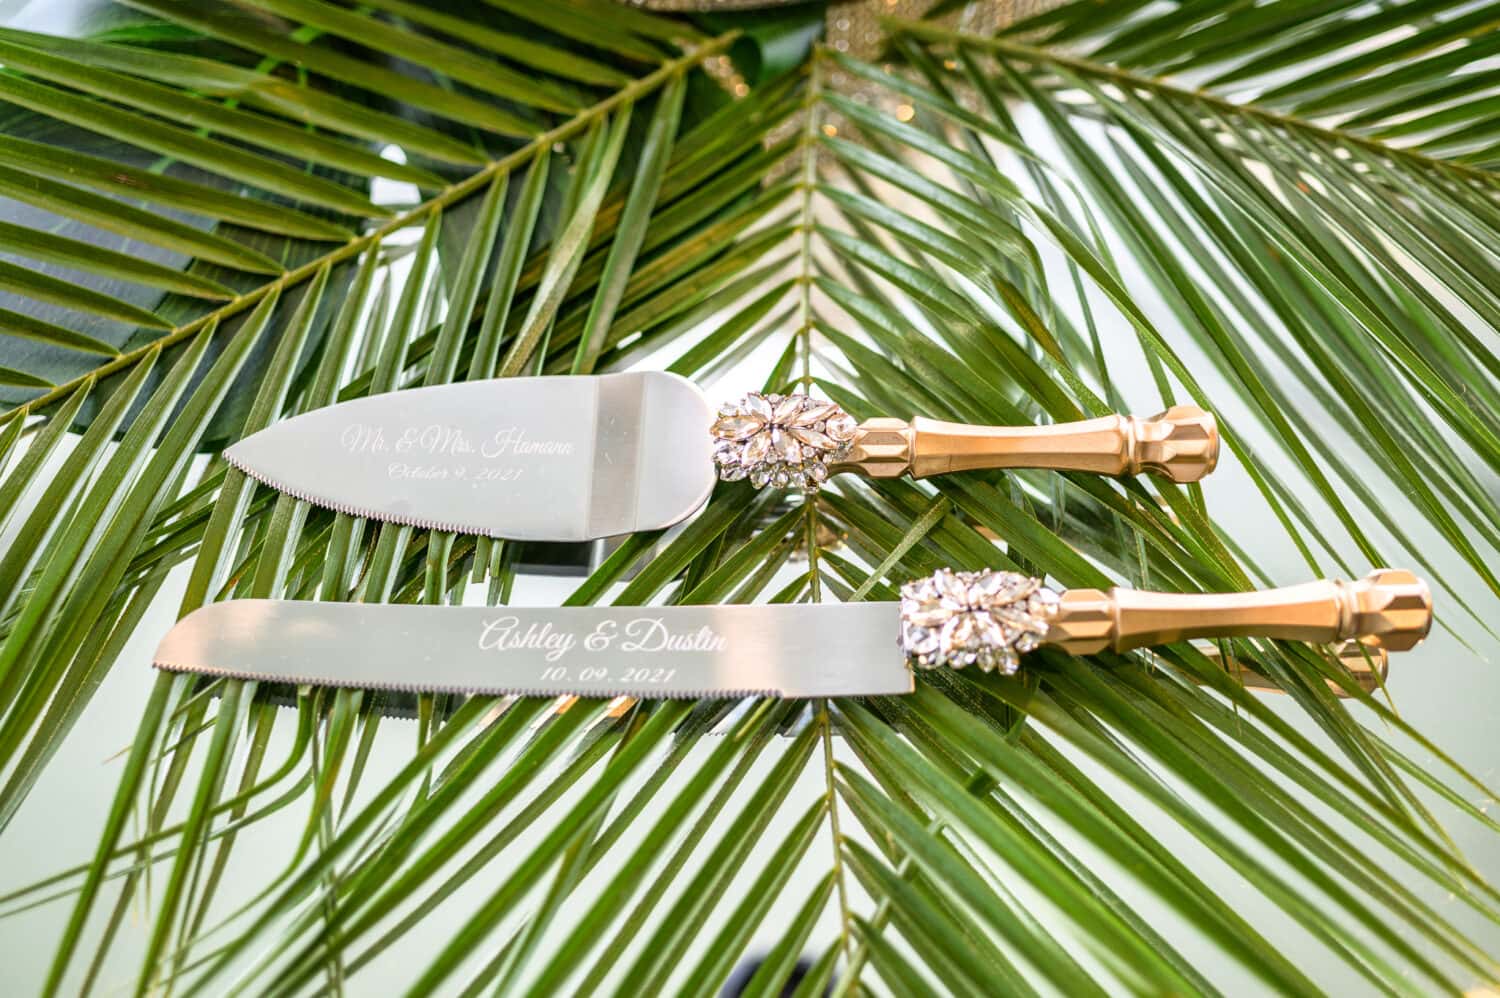 Cake knives with engraving  - Dunes Golf and Beach Club